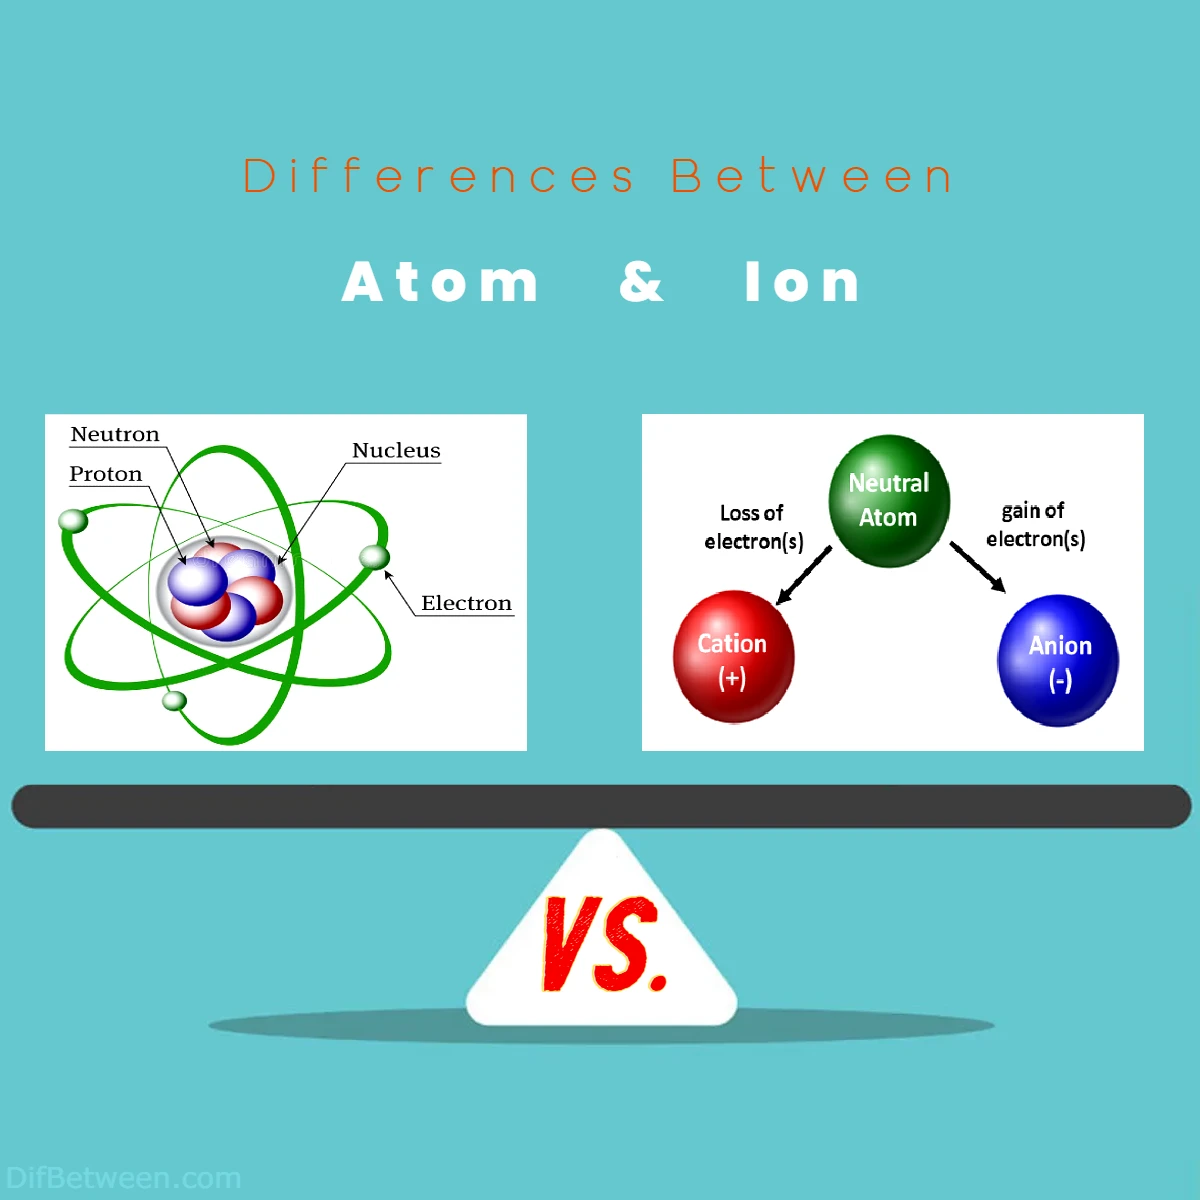 Differences Between Atom vs Ion